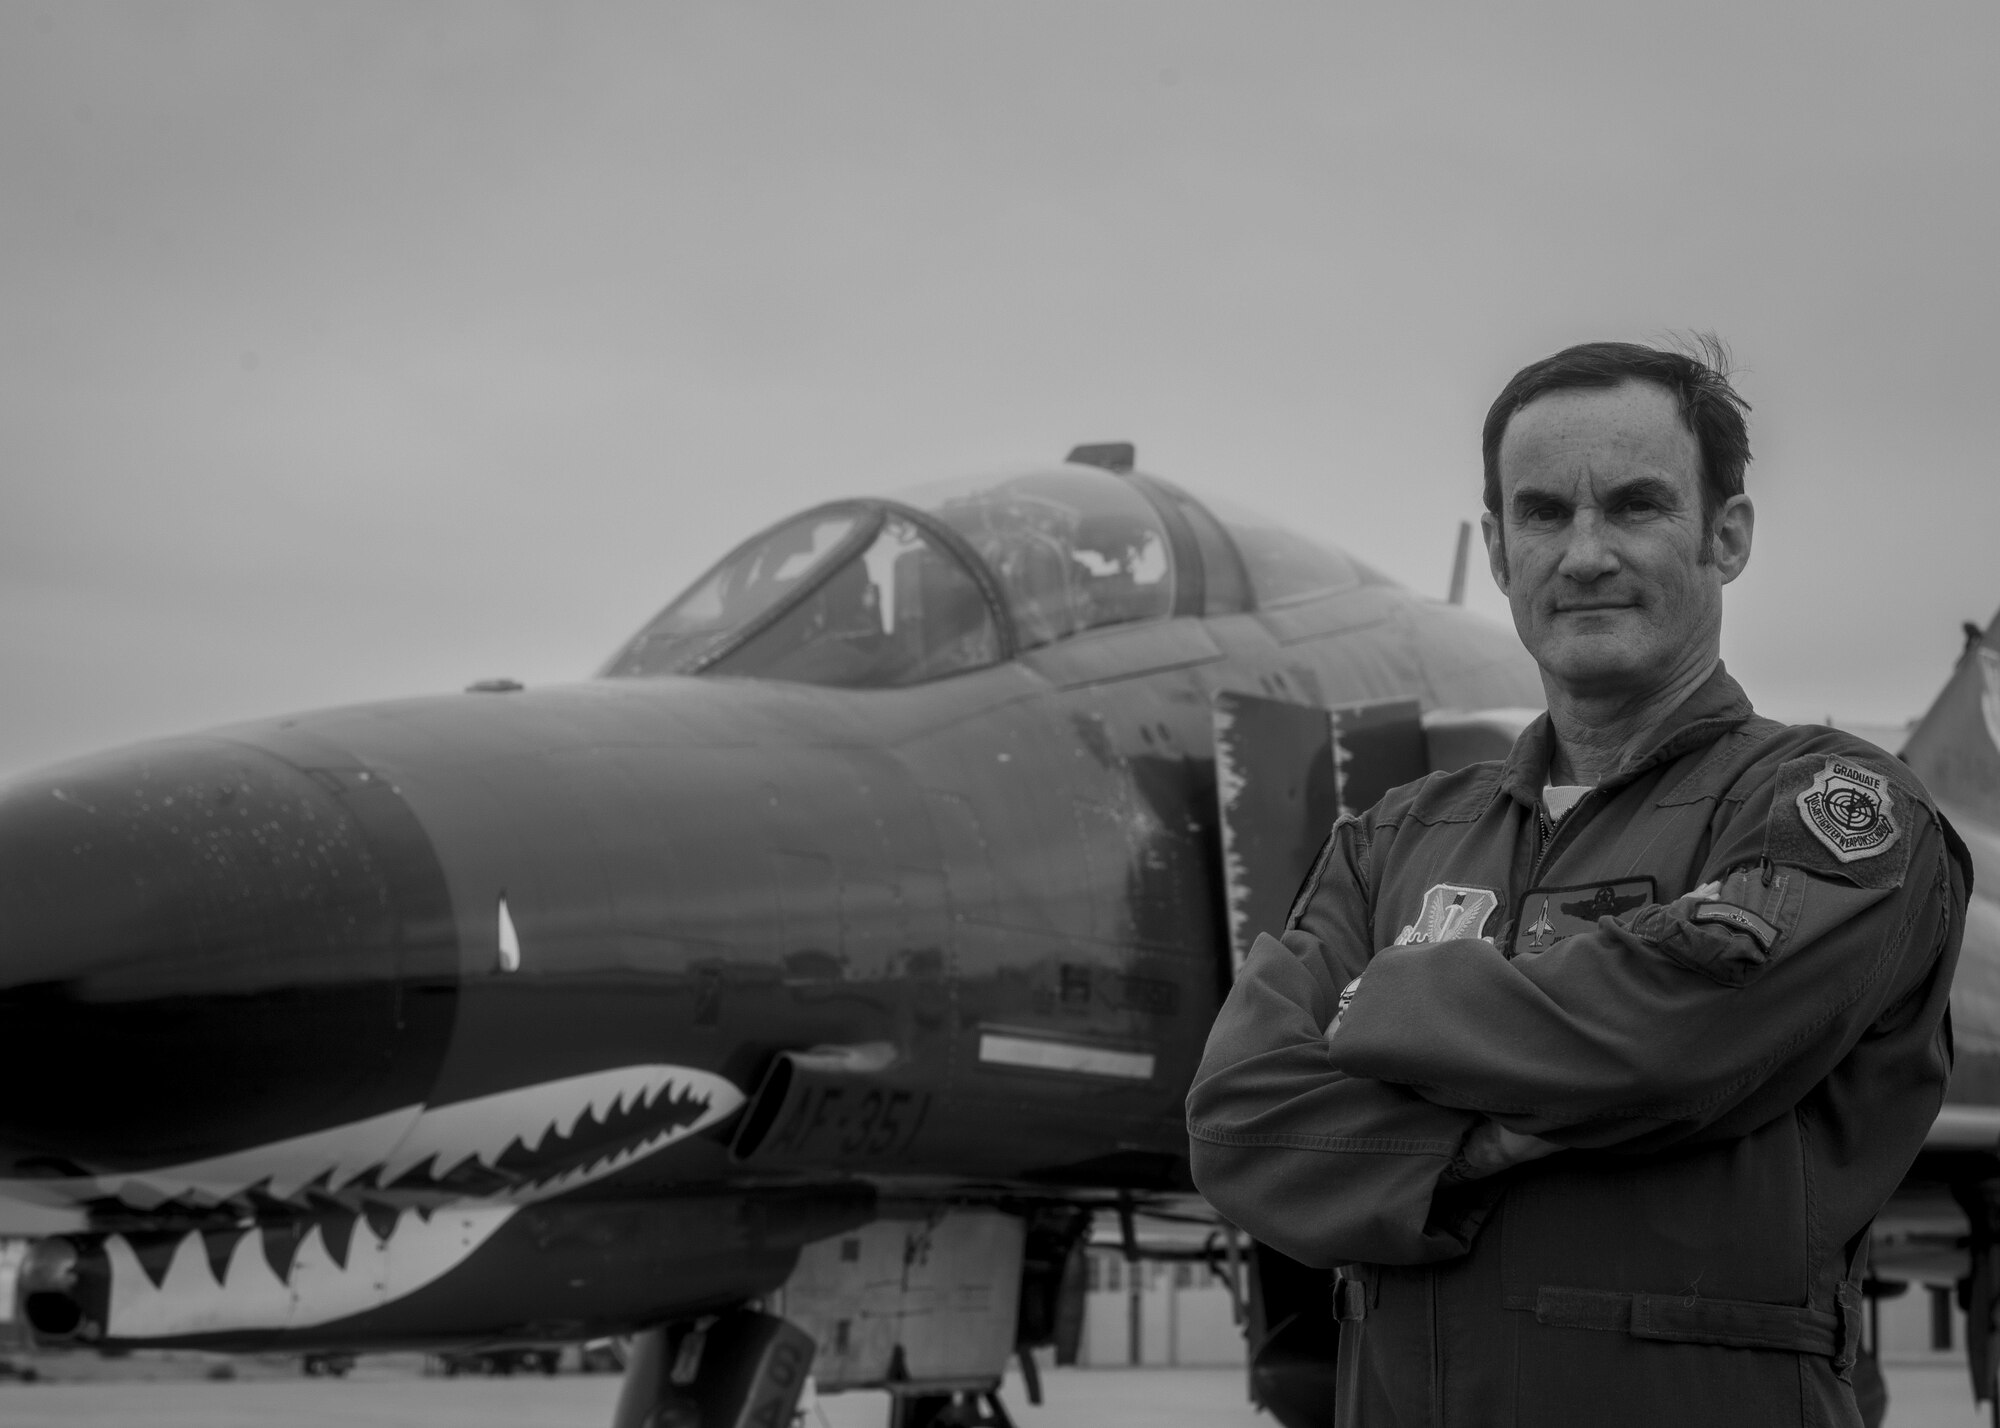 James Harkins, a QF-4 Drone pilot with the 82nd Aerial Targets Squadron, poses for a photo in front of a QF-4 on Oct. 28, 2015 at Holloman Air Force Base, N.M. Harkins was the first civilian pilot to fly 1,000 hours in a QF-4, with all of those hours flown as a civilian. He will likely be the last pilot to earn his thousand-hour patch before the QF-4 is officially retired and replaced by the QF-16 at the end of 2016. (U.S. Air Force photo by Airman 1st Class Emily A. Kenney/Released)